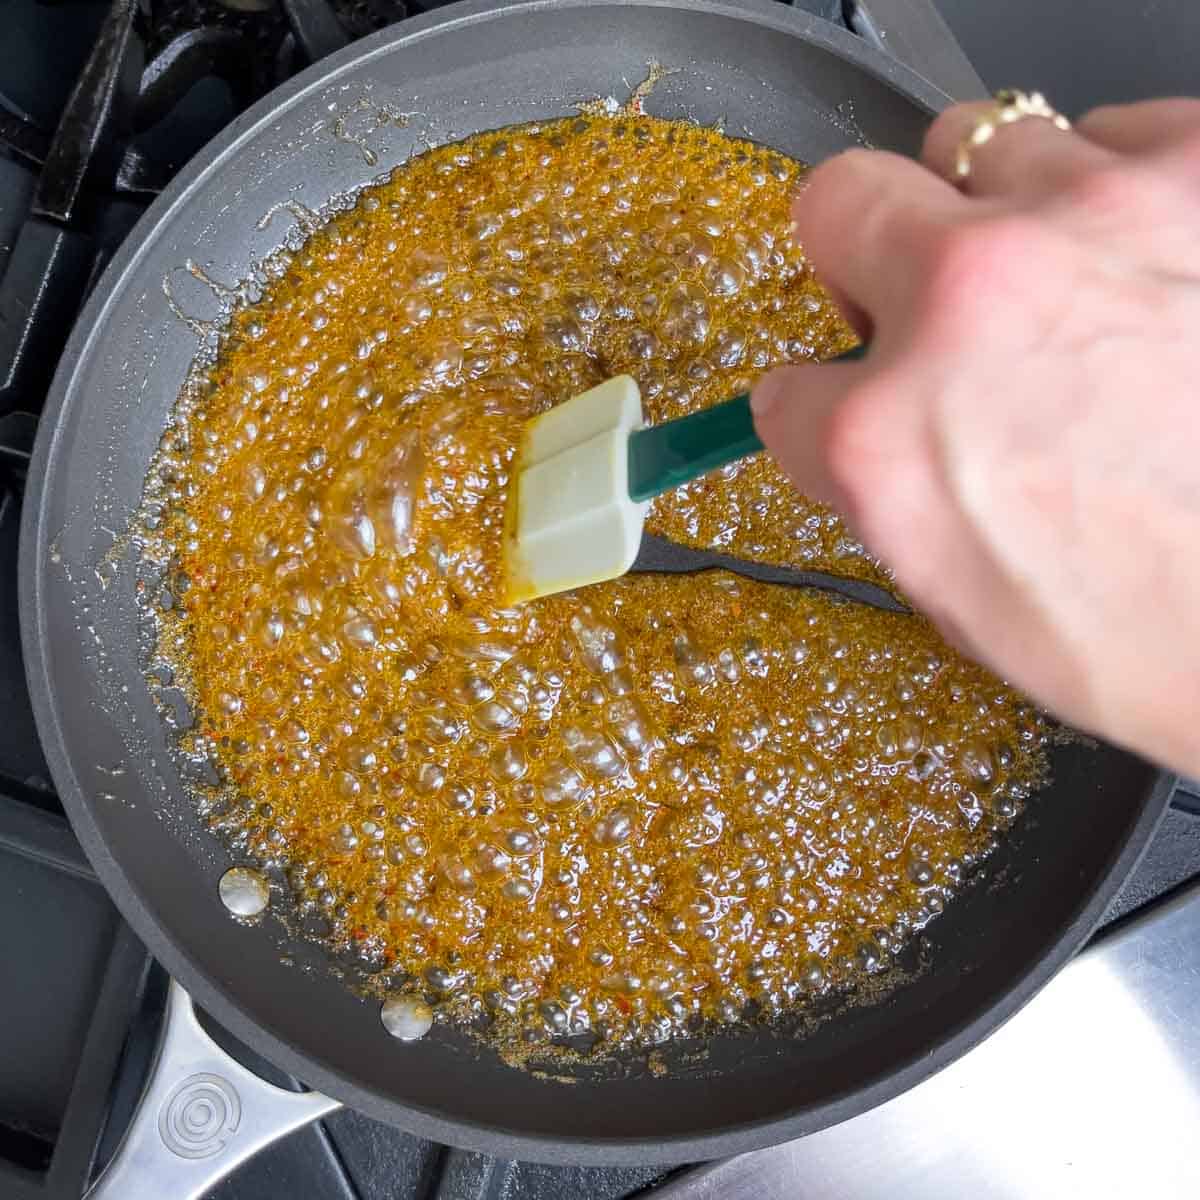 Skillet of butter and spices simmering on the stove while being stirred with a rubber spatula.